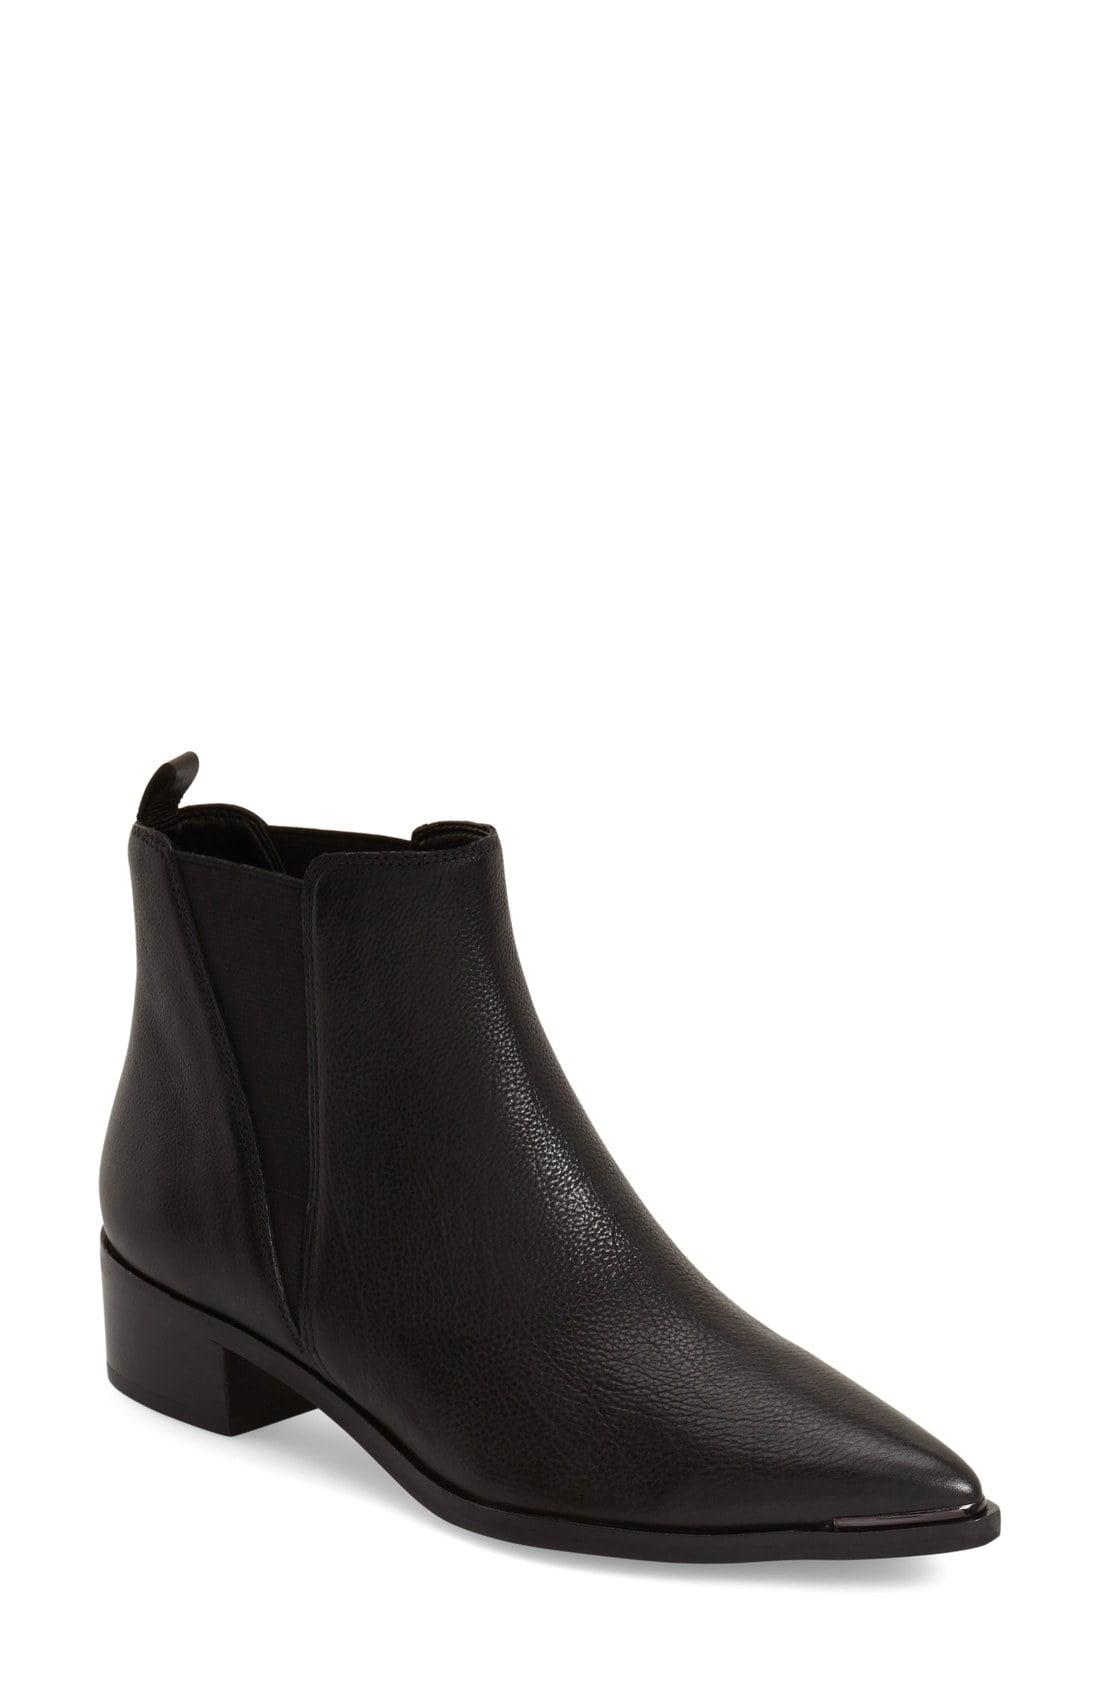 Marc Fisher Yale Chelsea Boot in Black Leather (Black) - Lyst